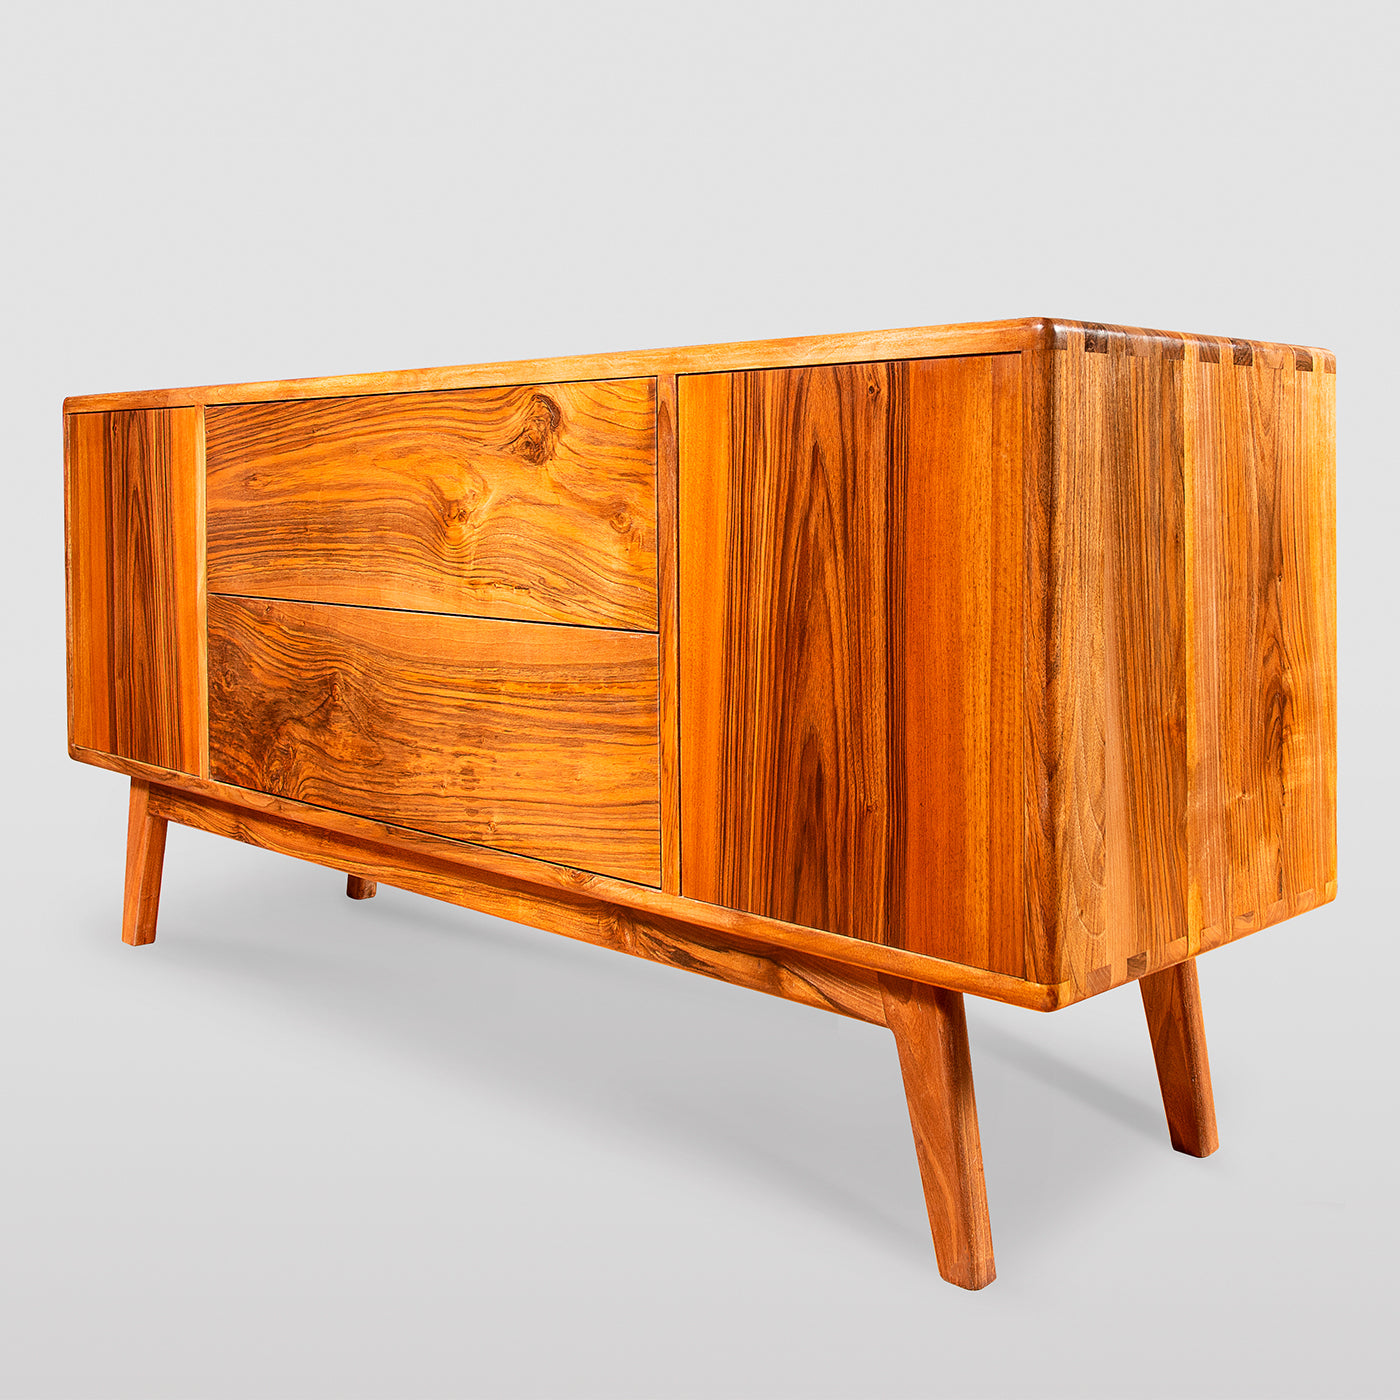 Dovetail Sideboard by Eugenio Gambella - Alternative view 4